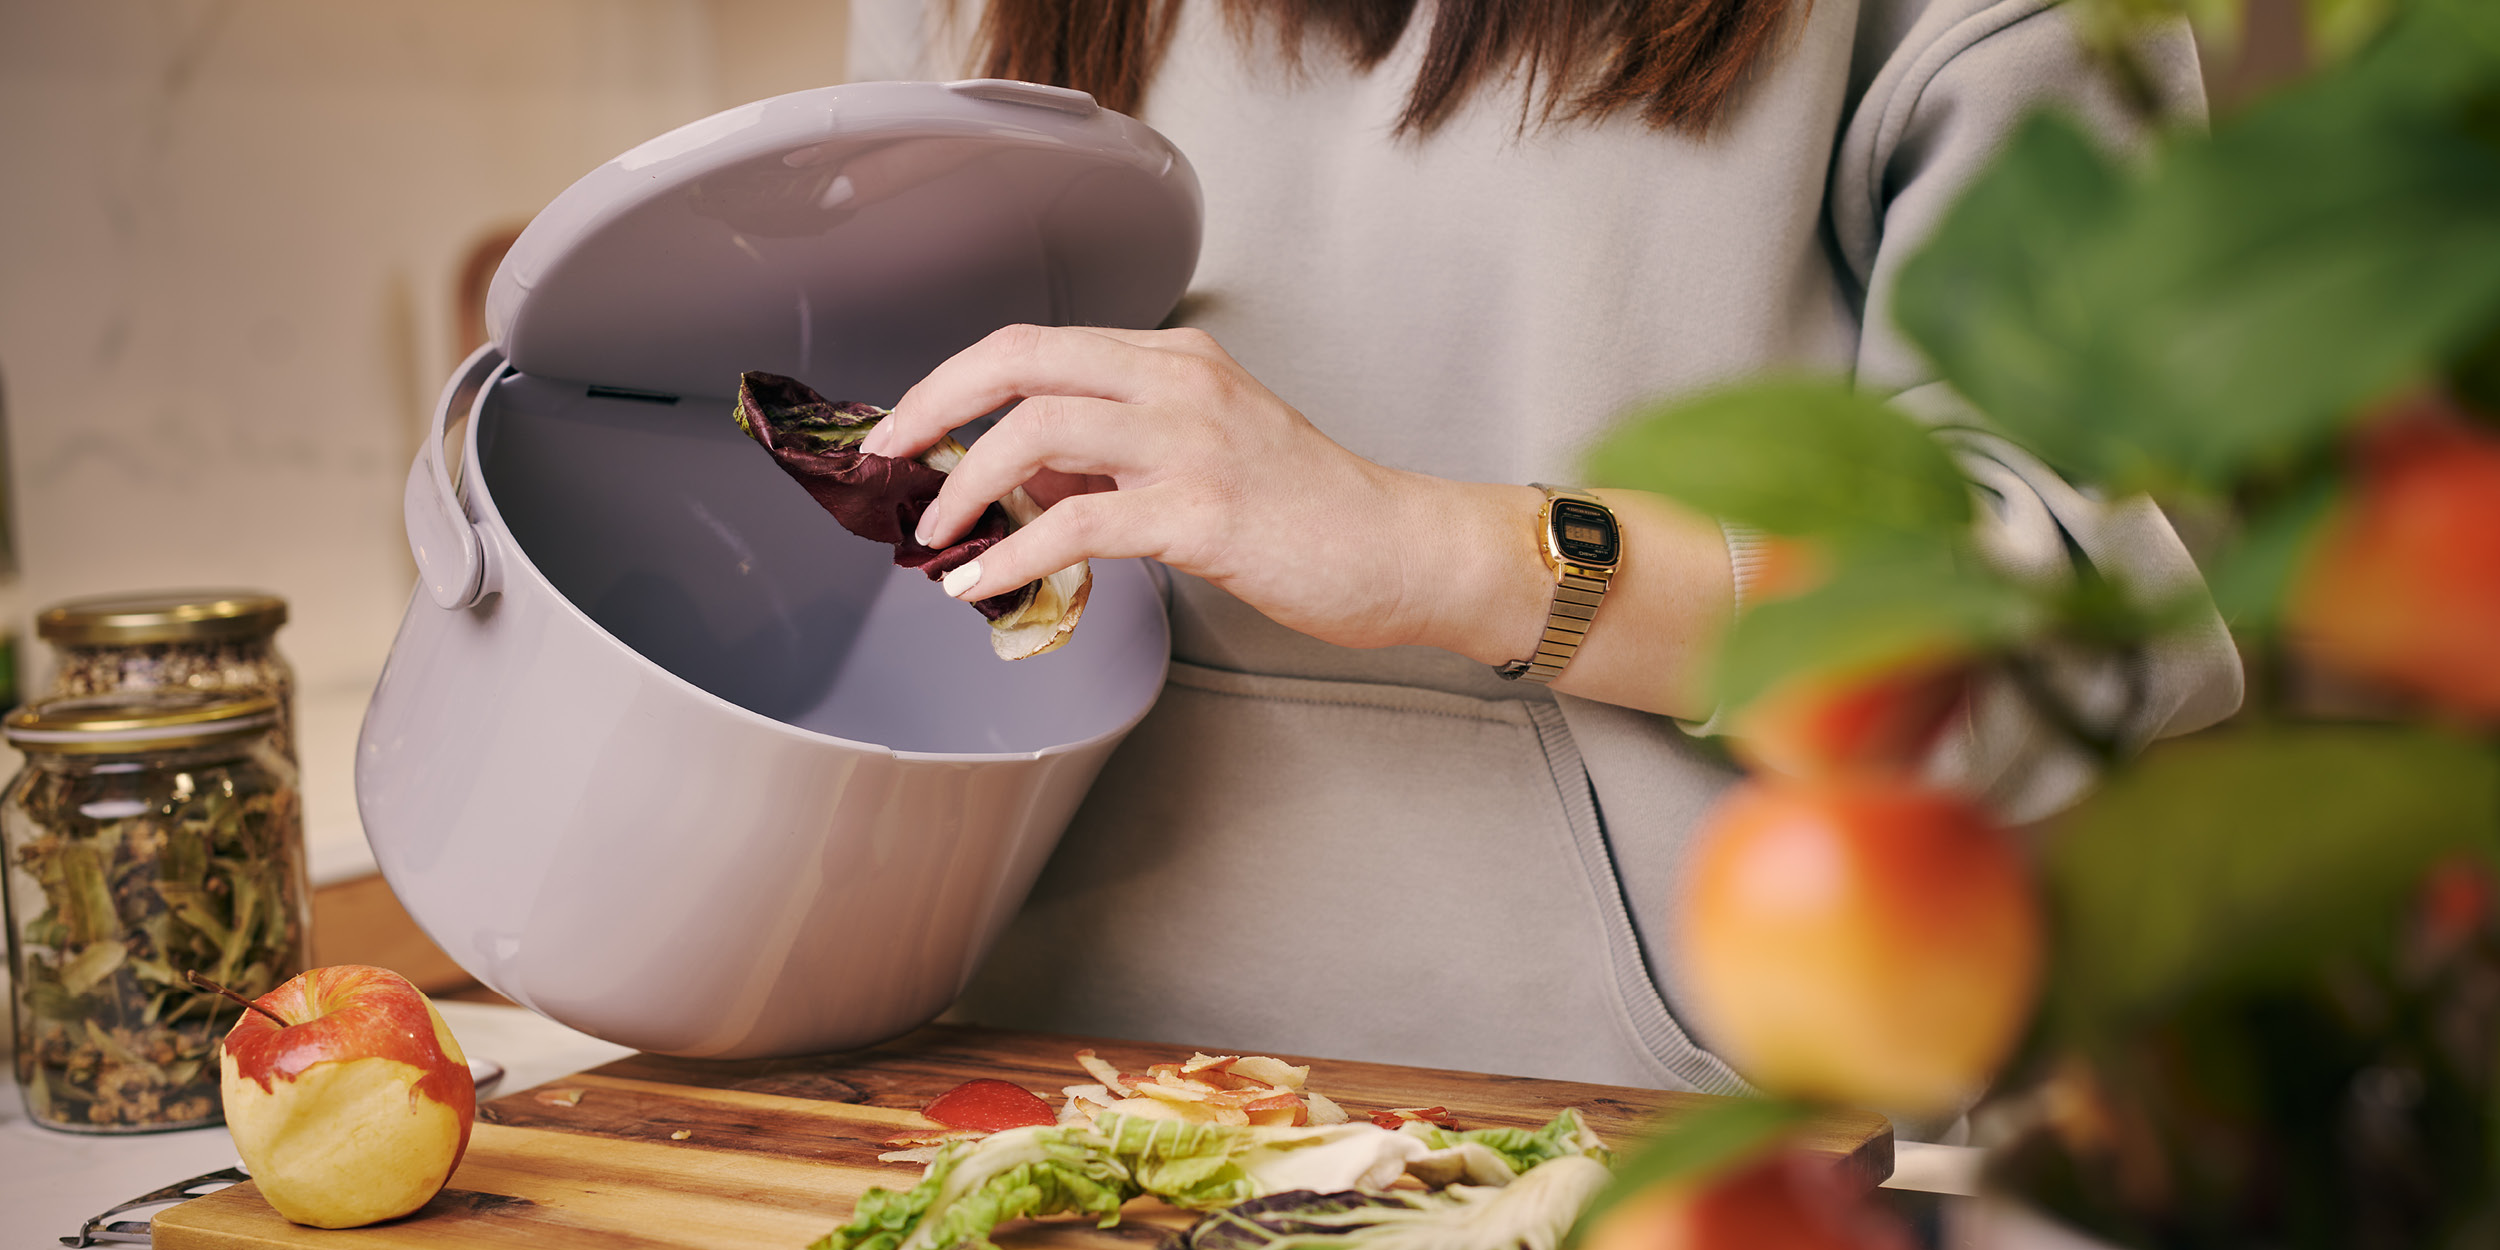 Organko Daily kitchen food waste bin is a must-have product for sustainable home